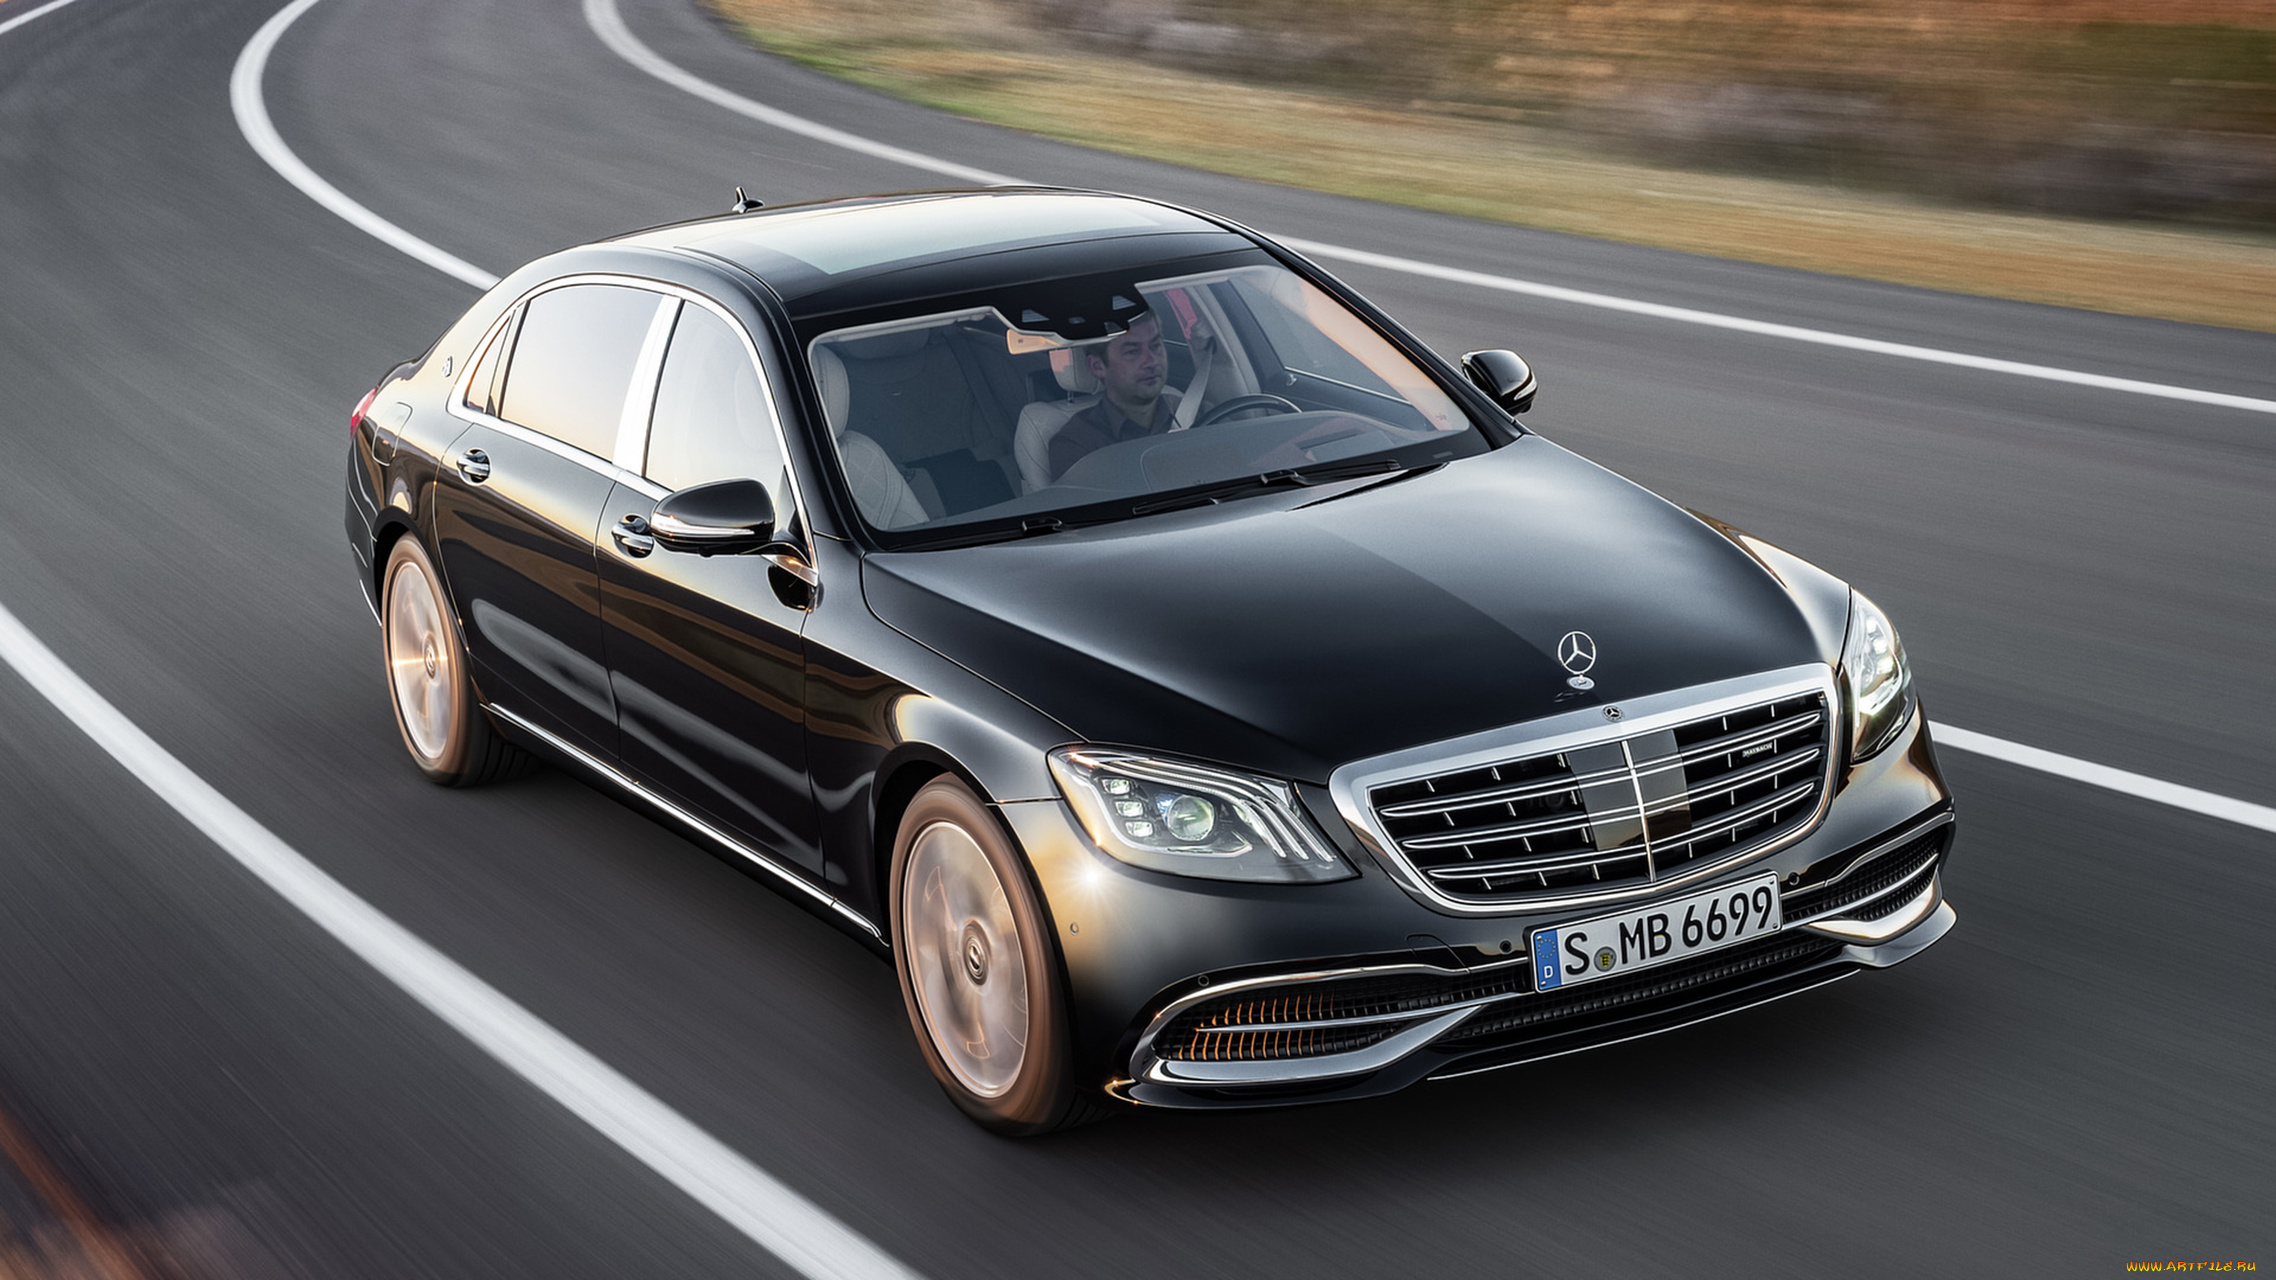 mercedes-maybach, s650, s-class, black, 2018, автомобили, mercedes-benz, 2018, black, s-class, s650, mercedes-maybach